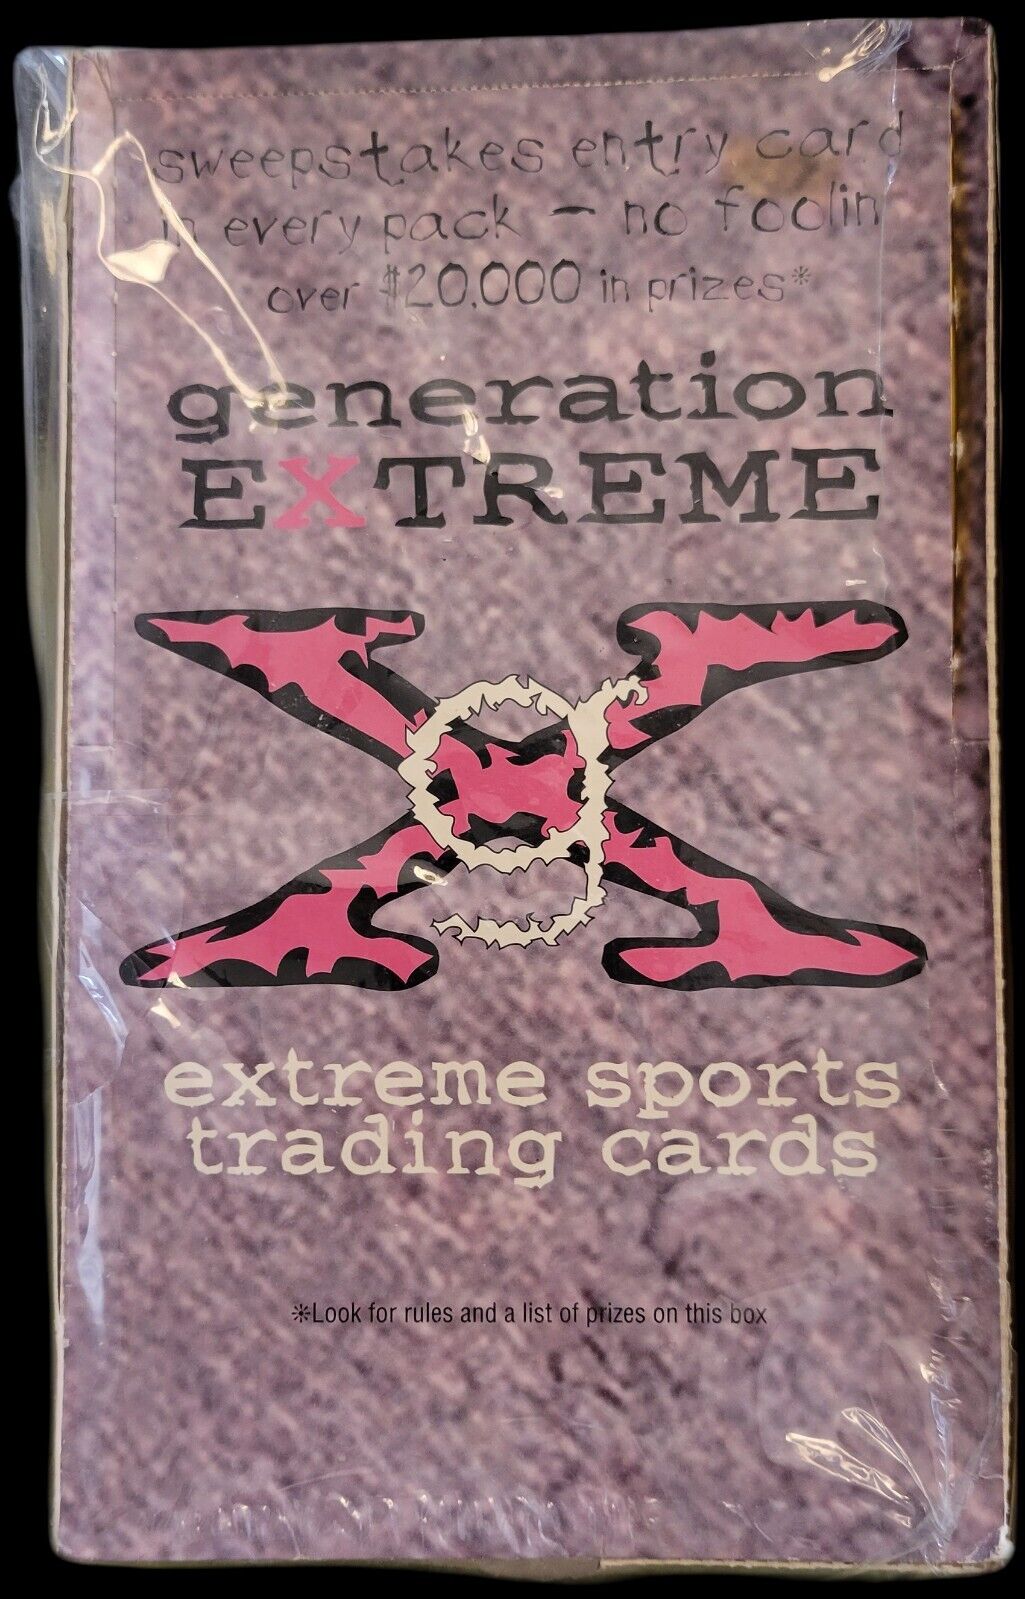 1994 GENERATION EXTREME SPORTS TRADING CARDS  Possible T. Hawk D. MIRRA Or Hoffm